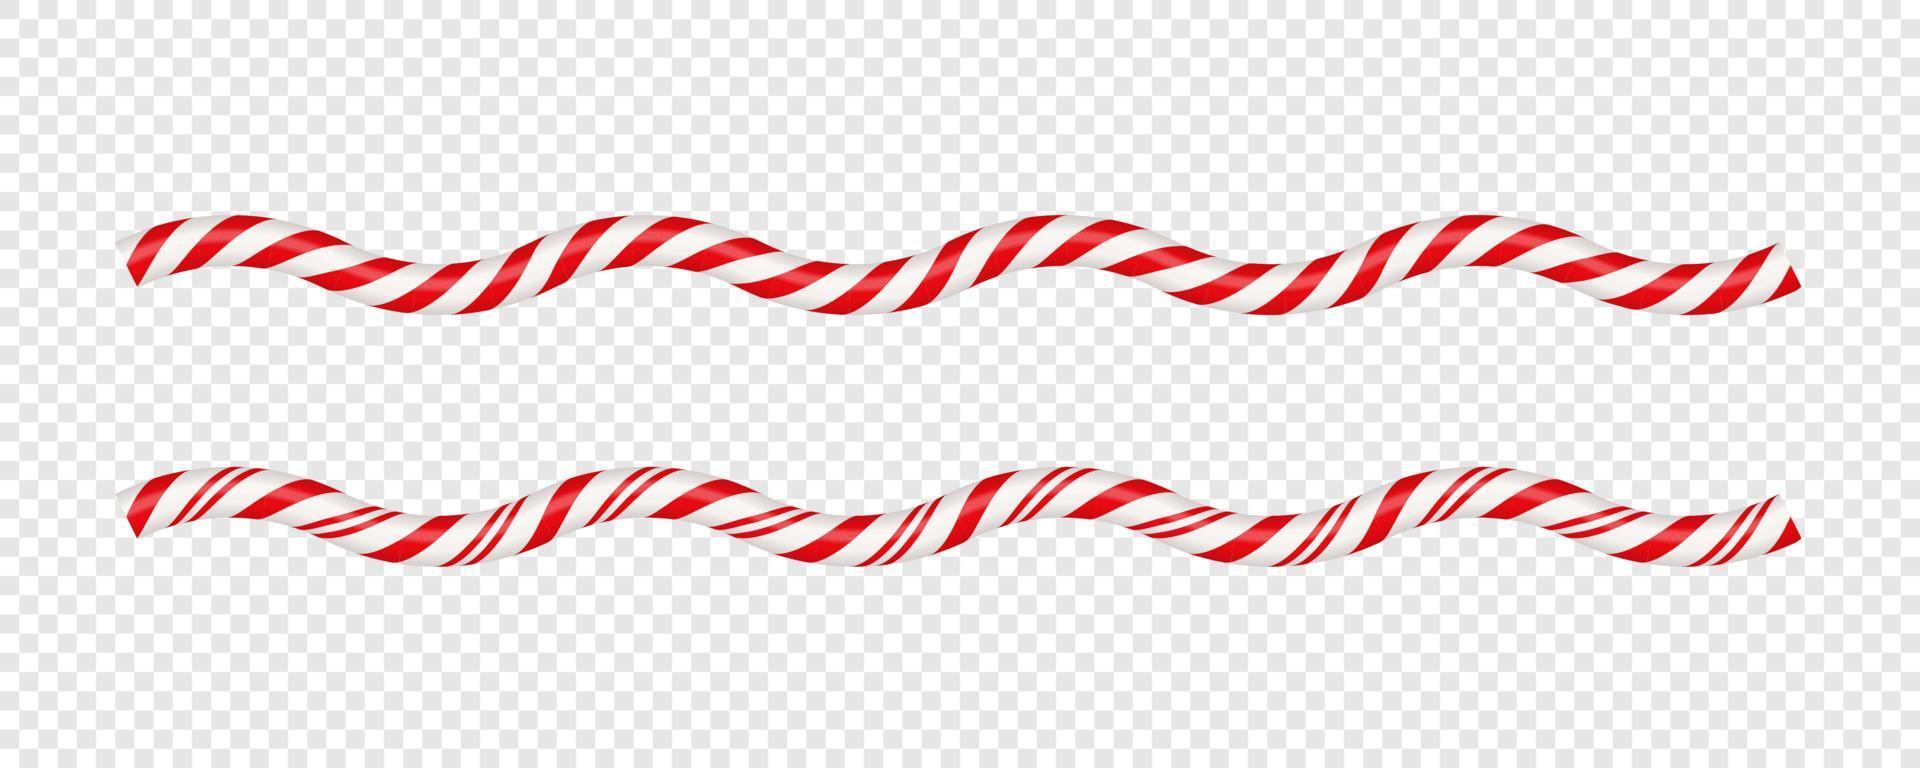 Christmas candy cane circle frame with red and white striped. Xmas border with striped candy lollipop pattern. Blank christmas and new year template. Vector illustration isolated on white background